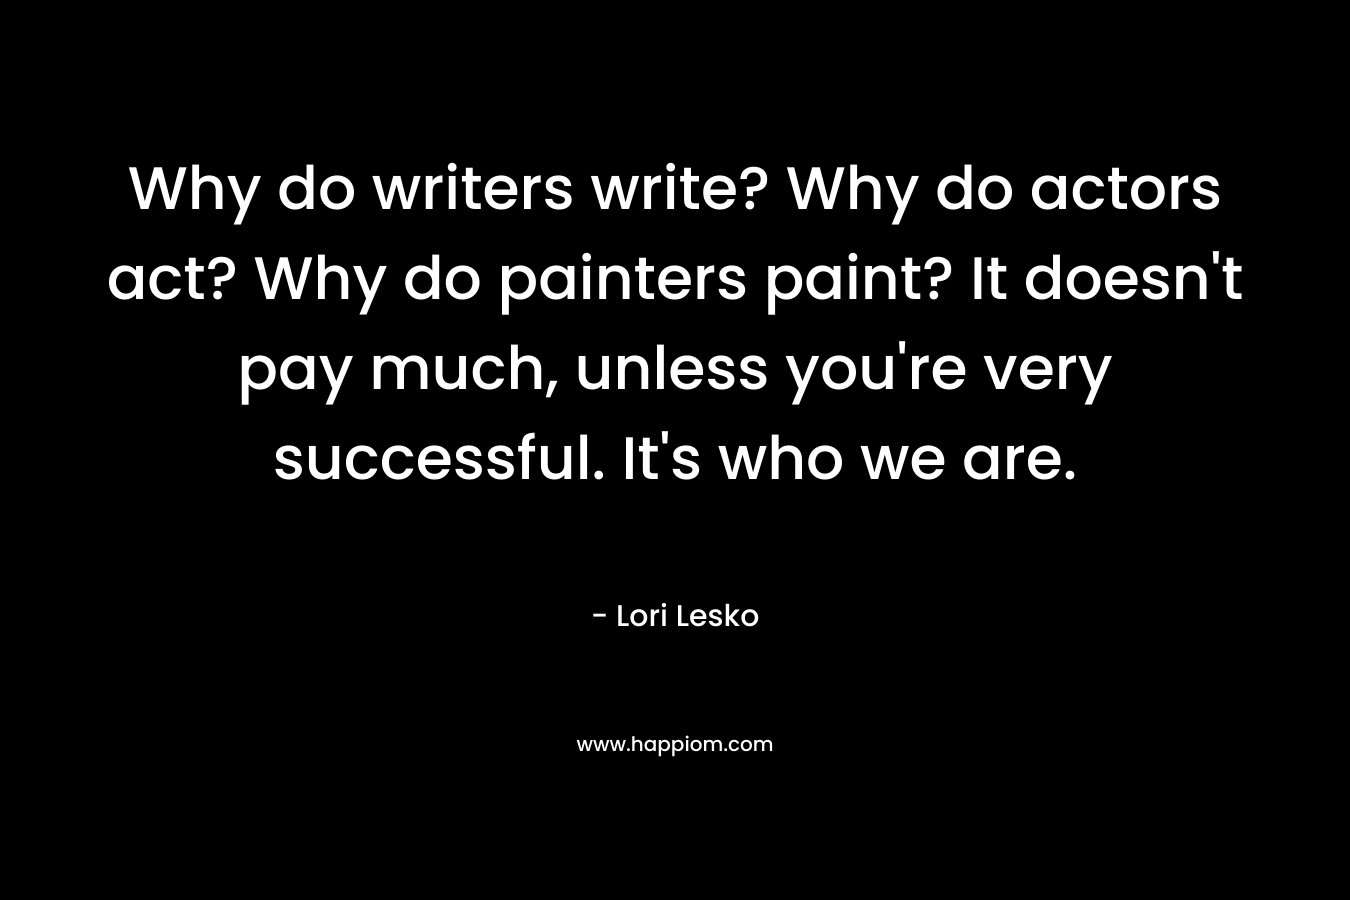 Why do writers write? Why do actors act? Why do painters paint? It doesn't pay much, unless you're very successful. It's who we are.